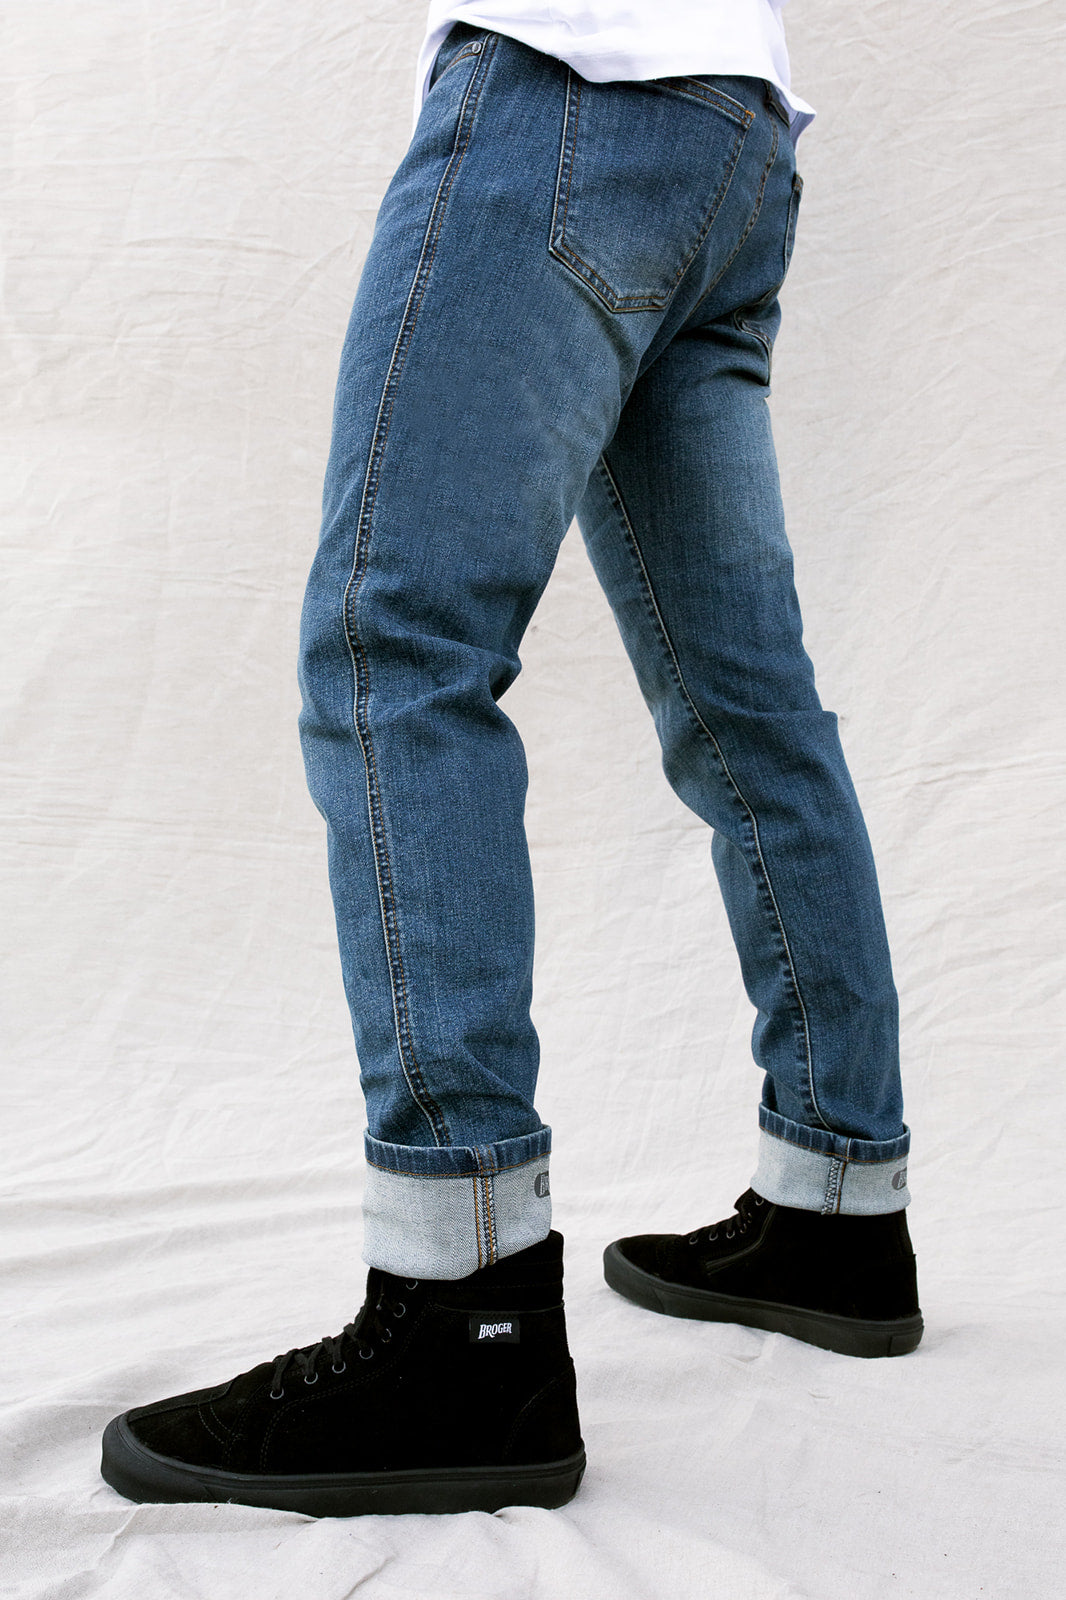 California Washed Blue Jeans - Slim Fit